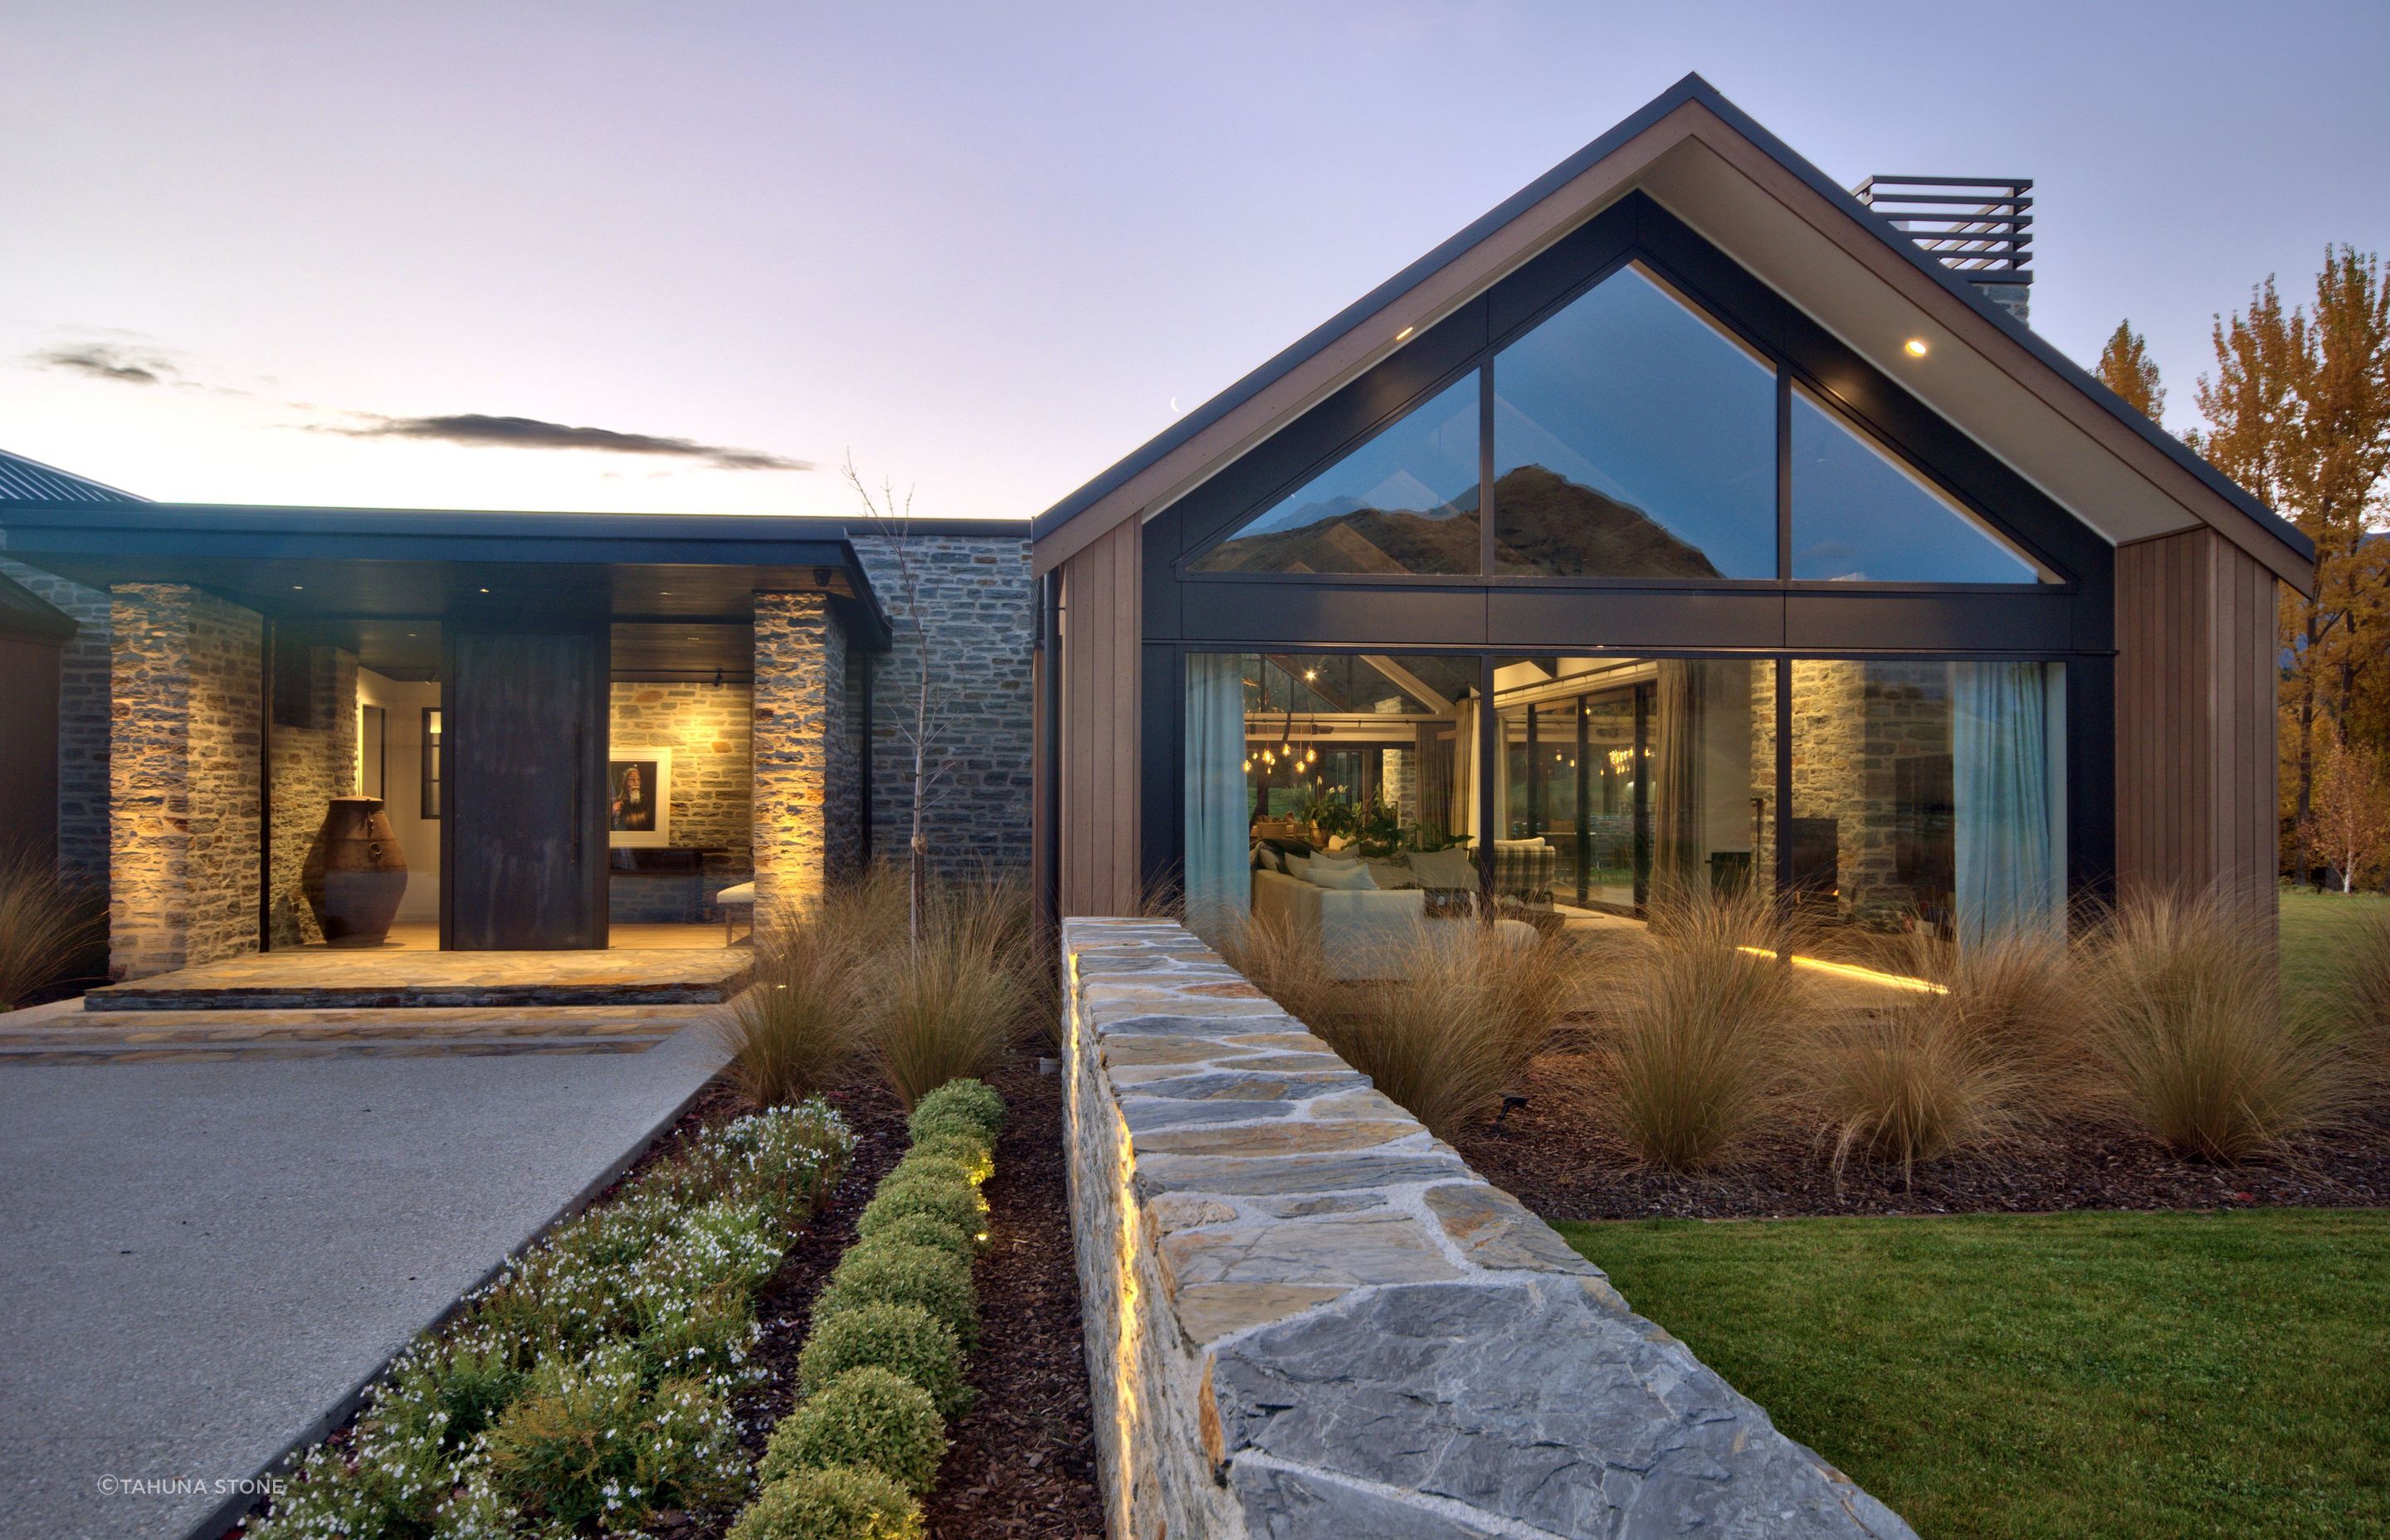 Blair uses traditional techniques and locally sourced schist stone to install cladding for houses, fireplaces, chimneys and landscaping walls across New Zealand.